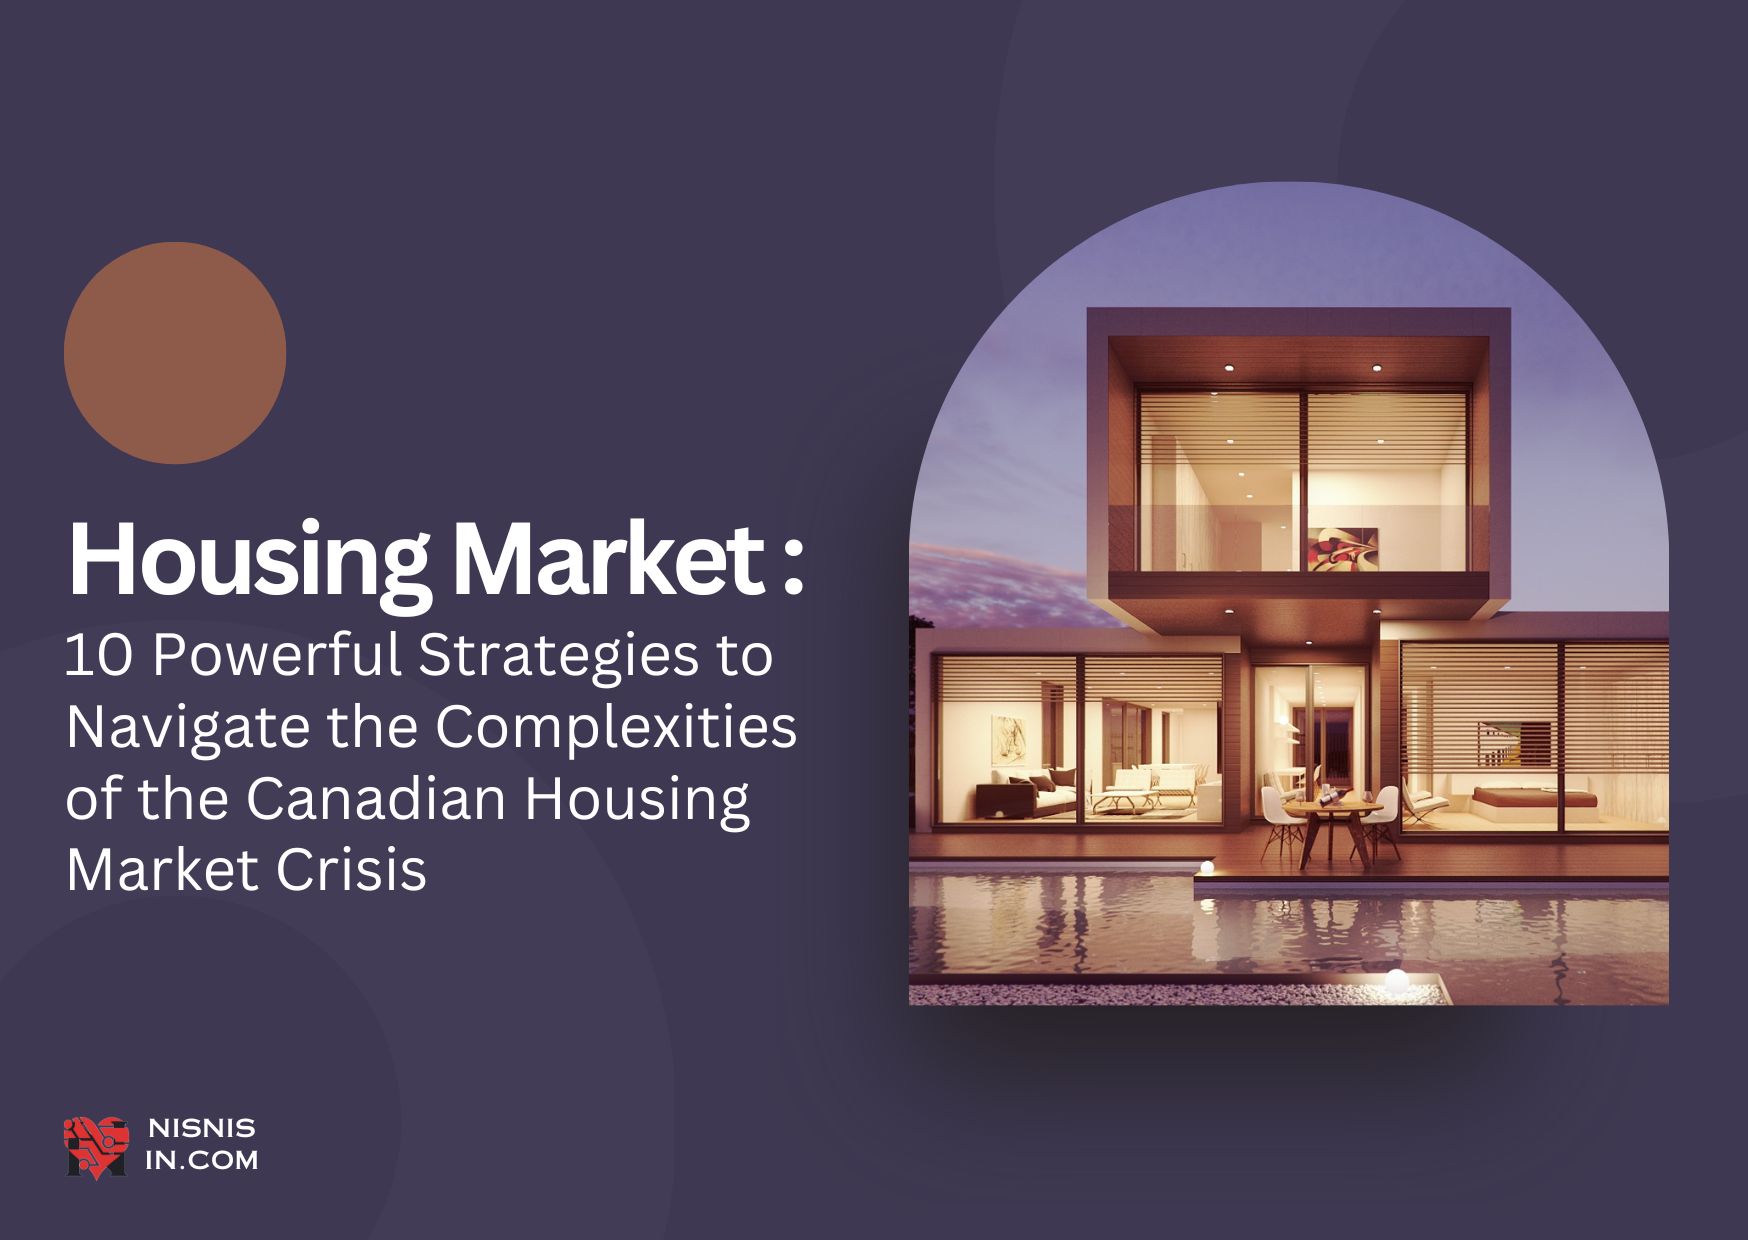 10 Powerful Strategies to Navigate the Complexities of the Canadian Housing Market Crisis